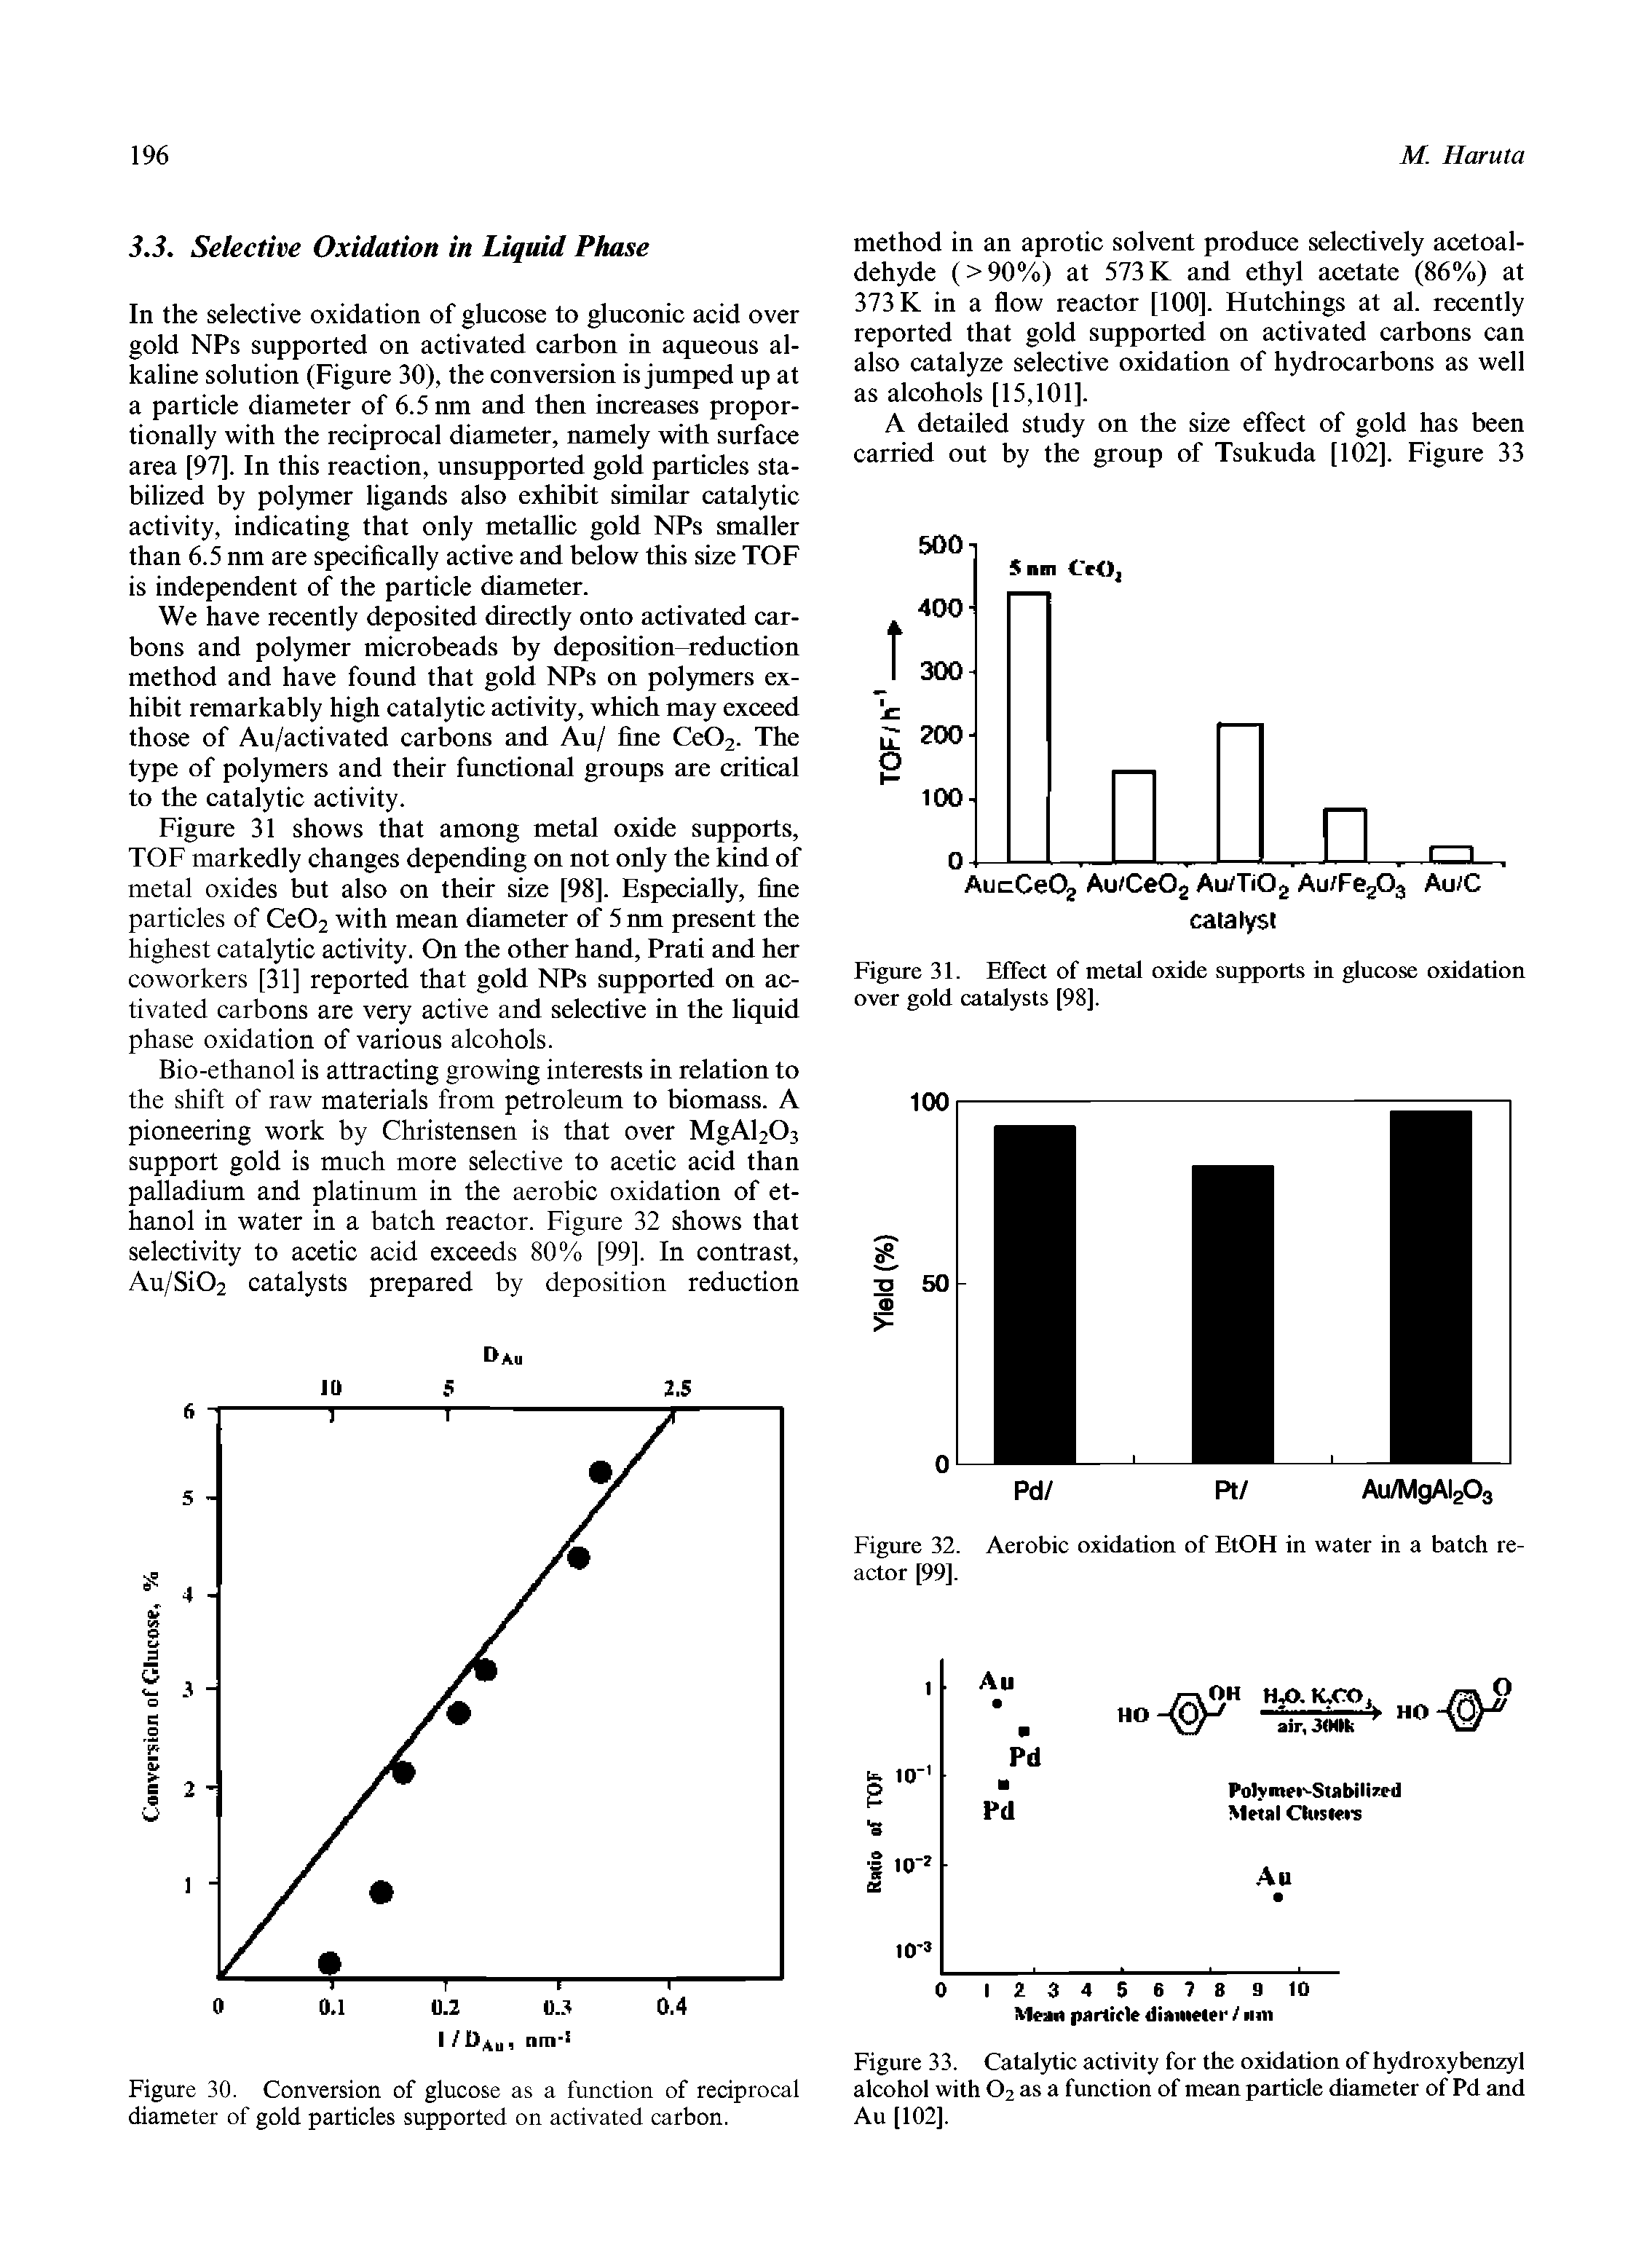 Figure 31. Effect of metal oxide supports in glucose oxidation over gold catalysts [98].